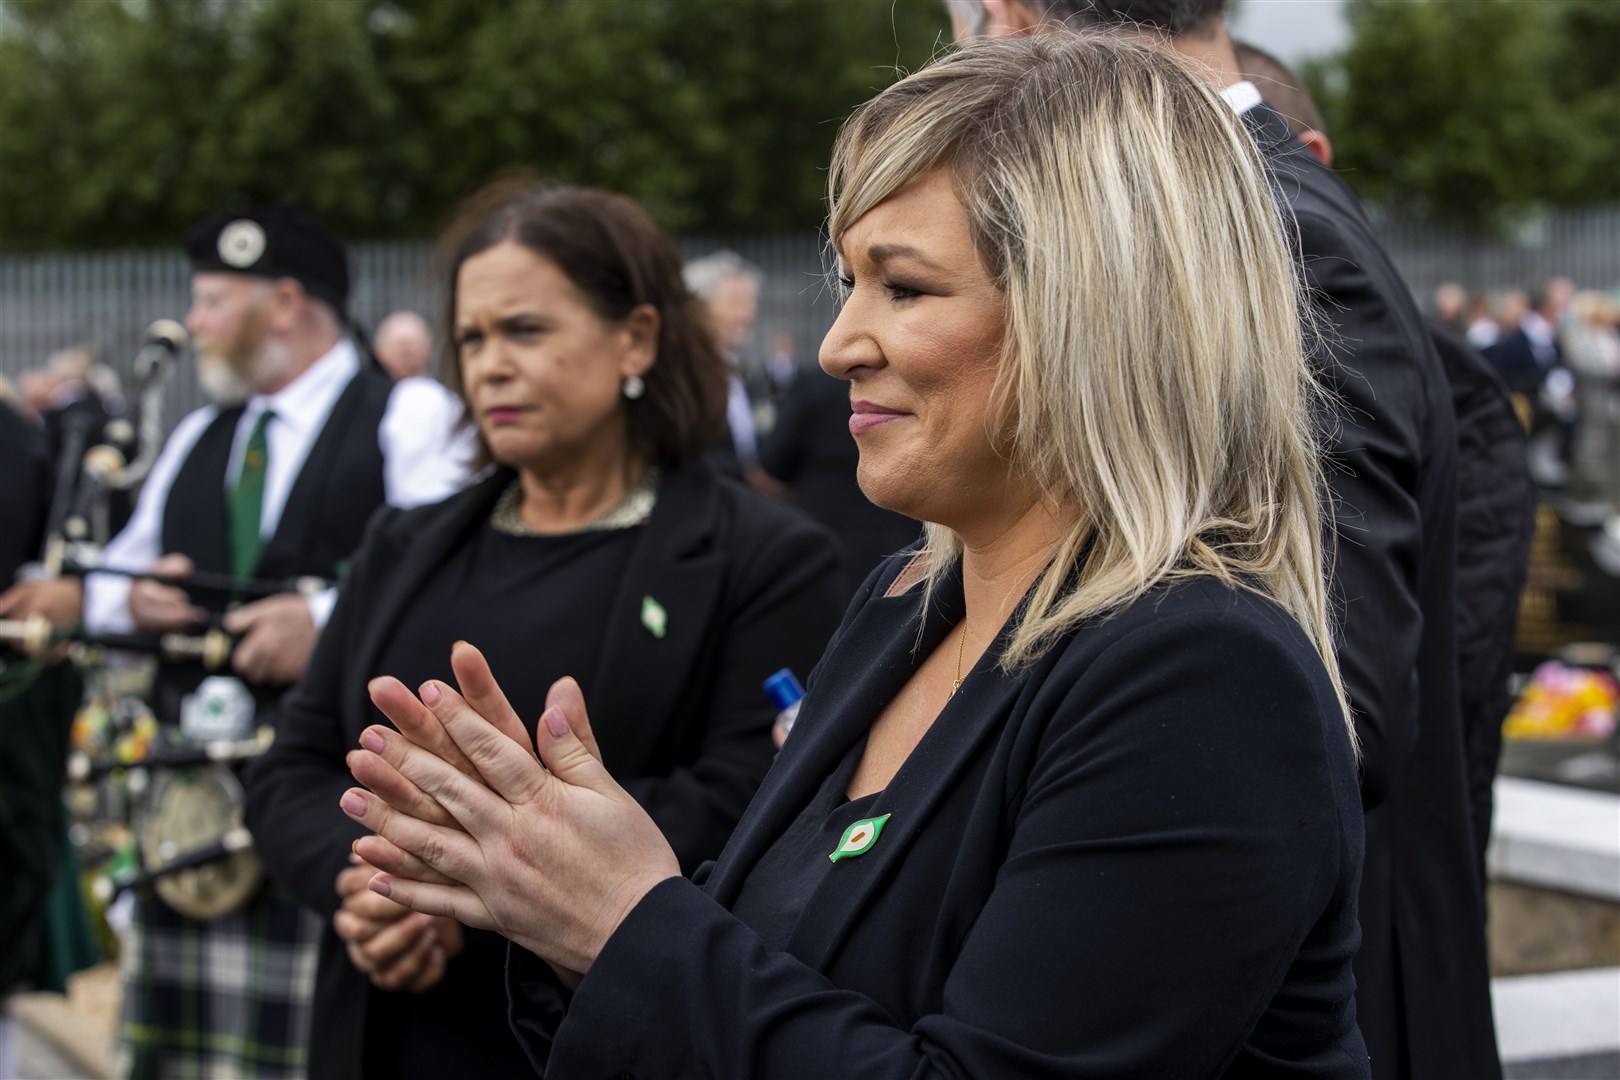 Sinn Fein leader Mary Lou McDonald and Deputy First Minister Michelle O’Neill during the funeral of senior republican Bobby Storey (Liam McBurney/PA)